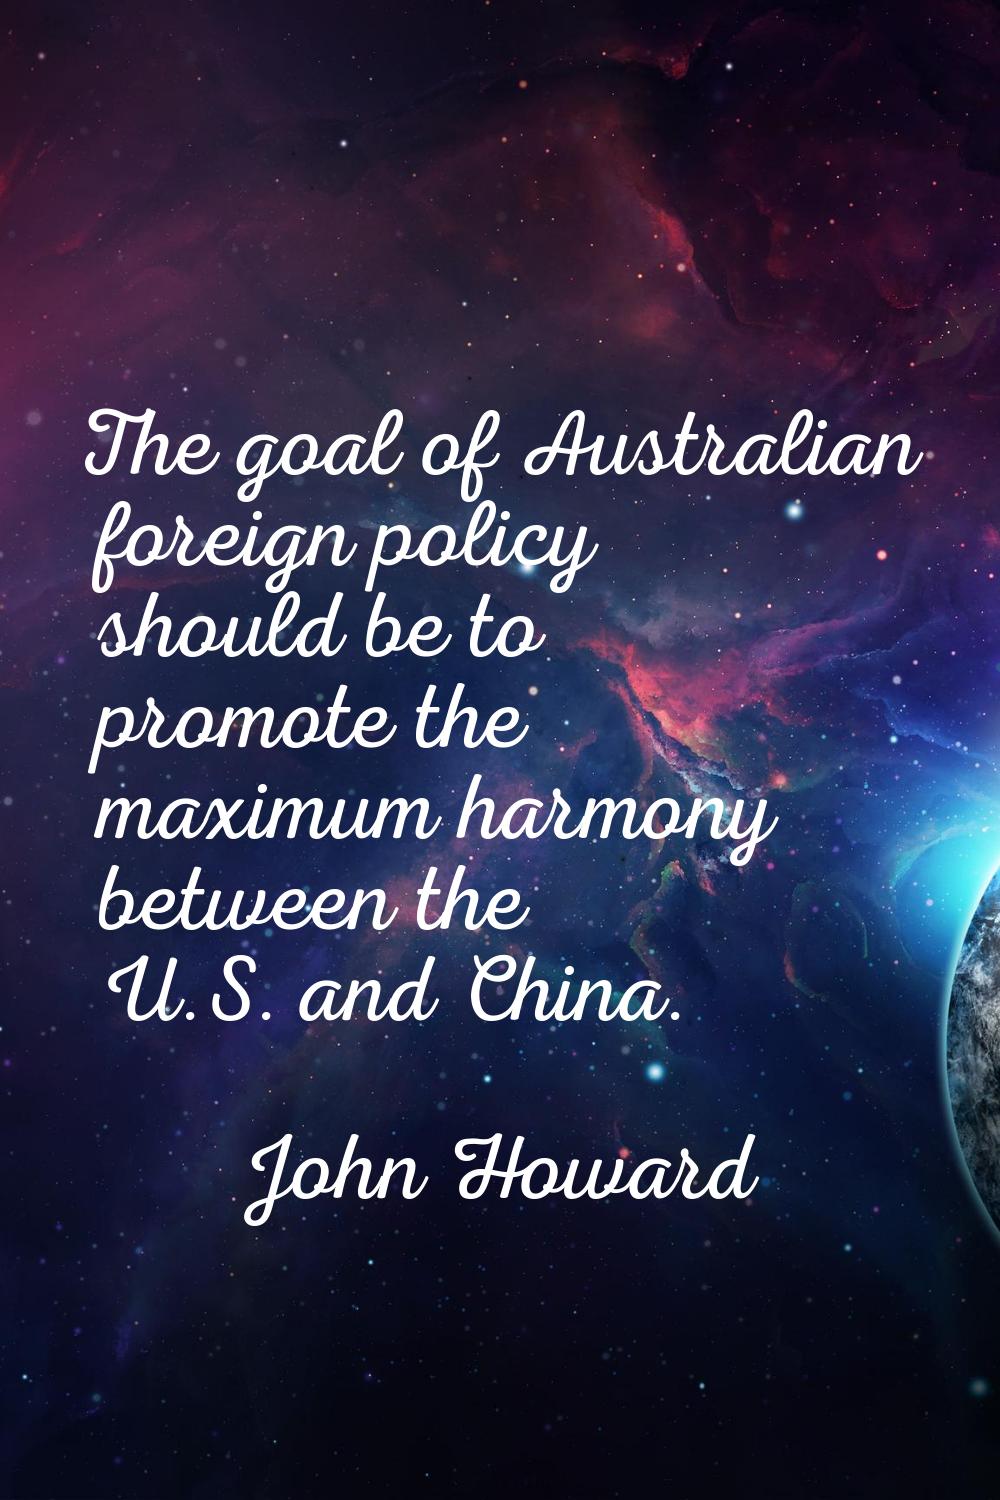 The goal of Australian foreign policy should be to promote the maximum harmony between the U.S. and